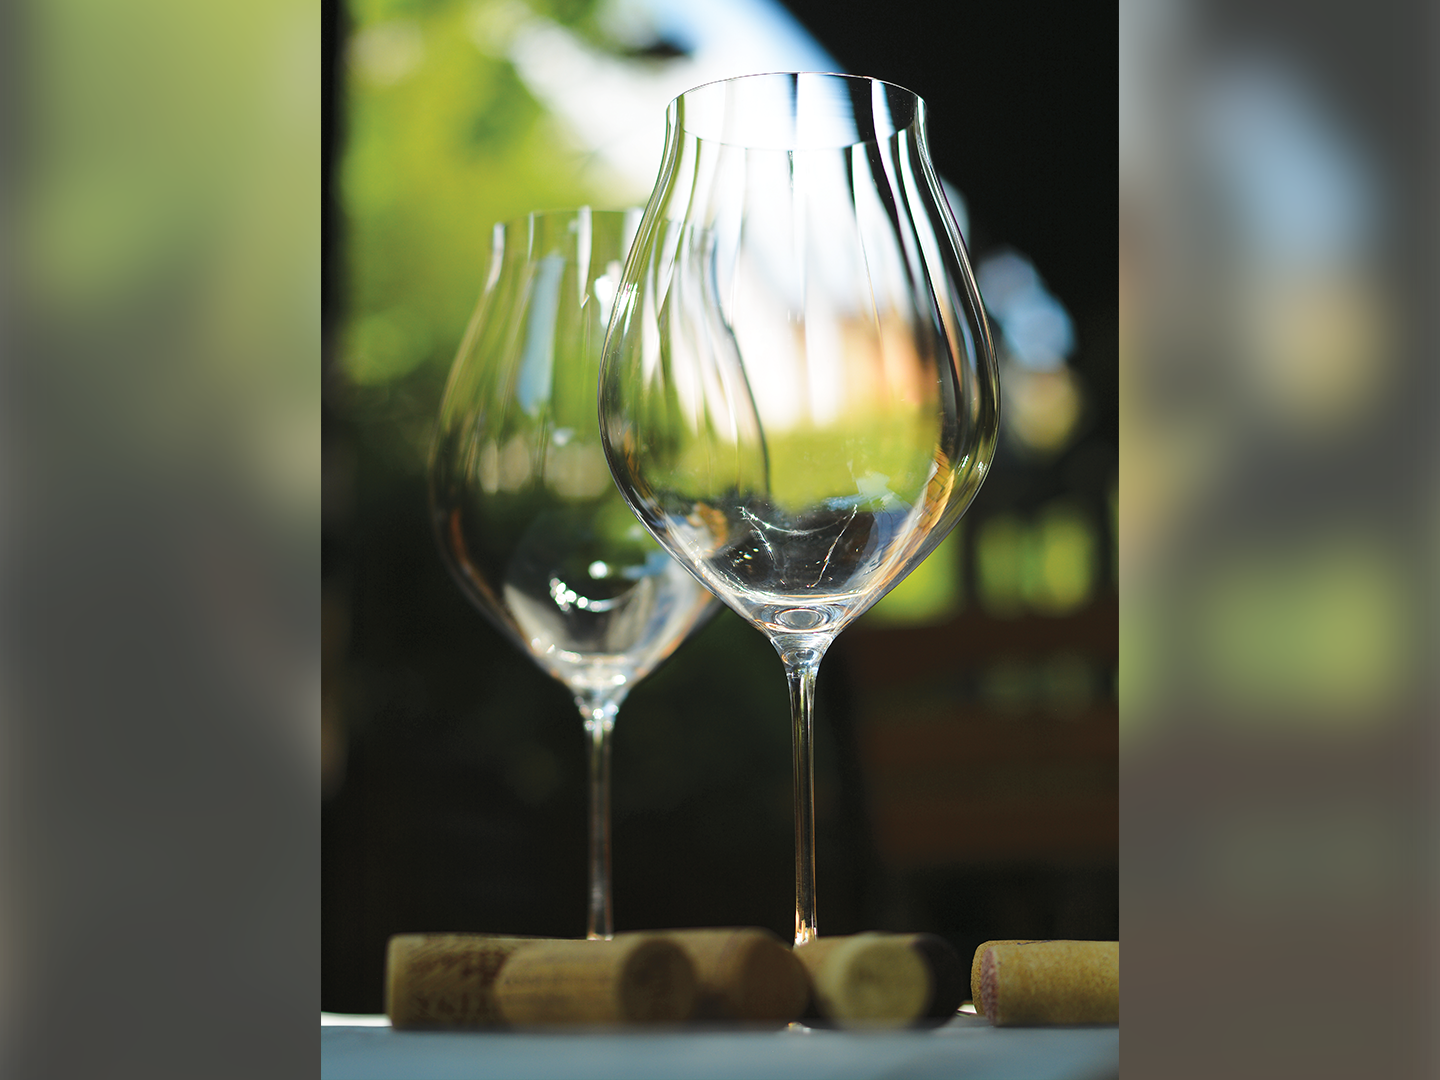 The Riedel Areni wine glass is designed to enhance the taste of Armenian wine.